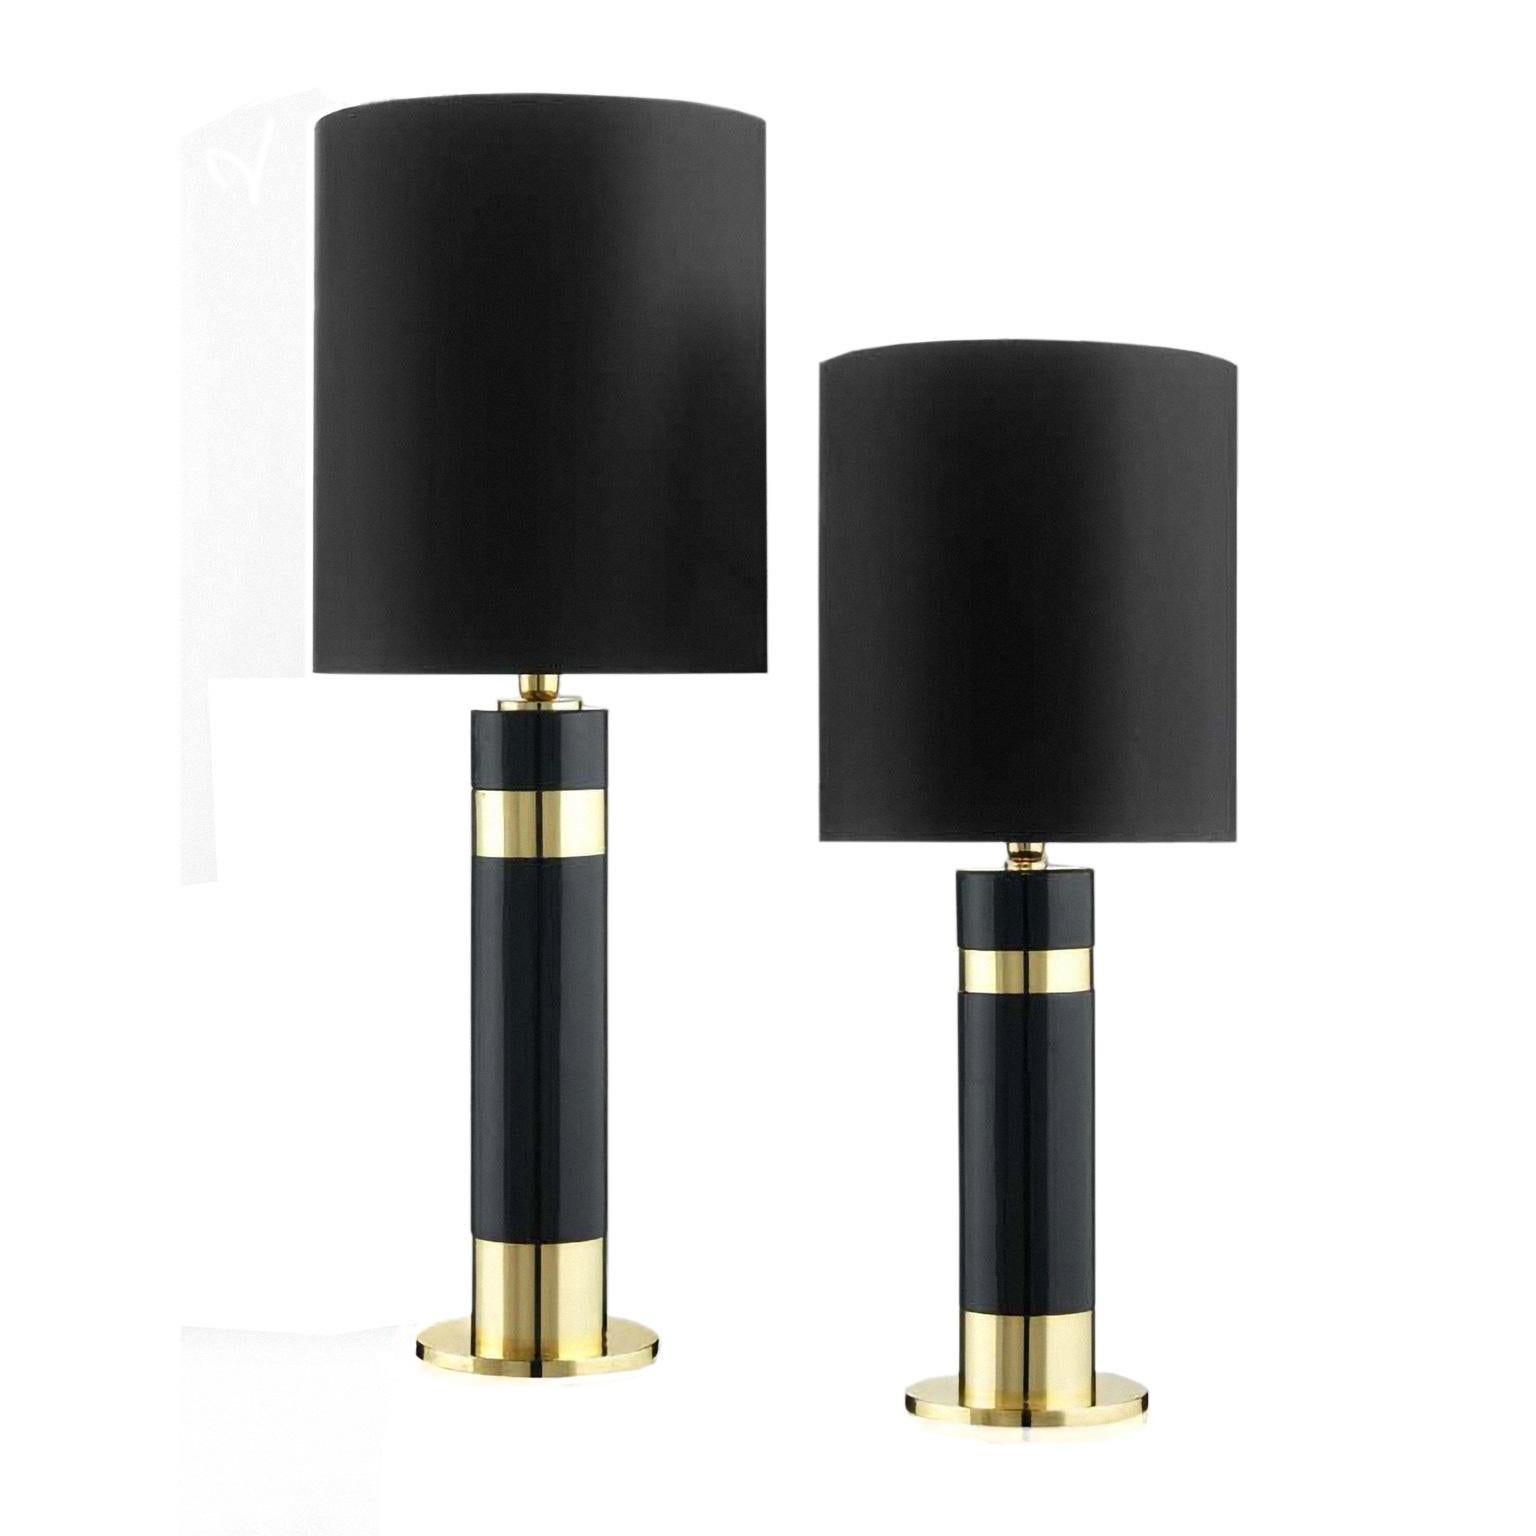 Hermes 1, Ceramic Lamp Black Glazed and Handcrafted in 24-Karat Gold In New Condition For Sale In Treviso, IT